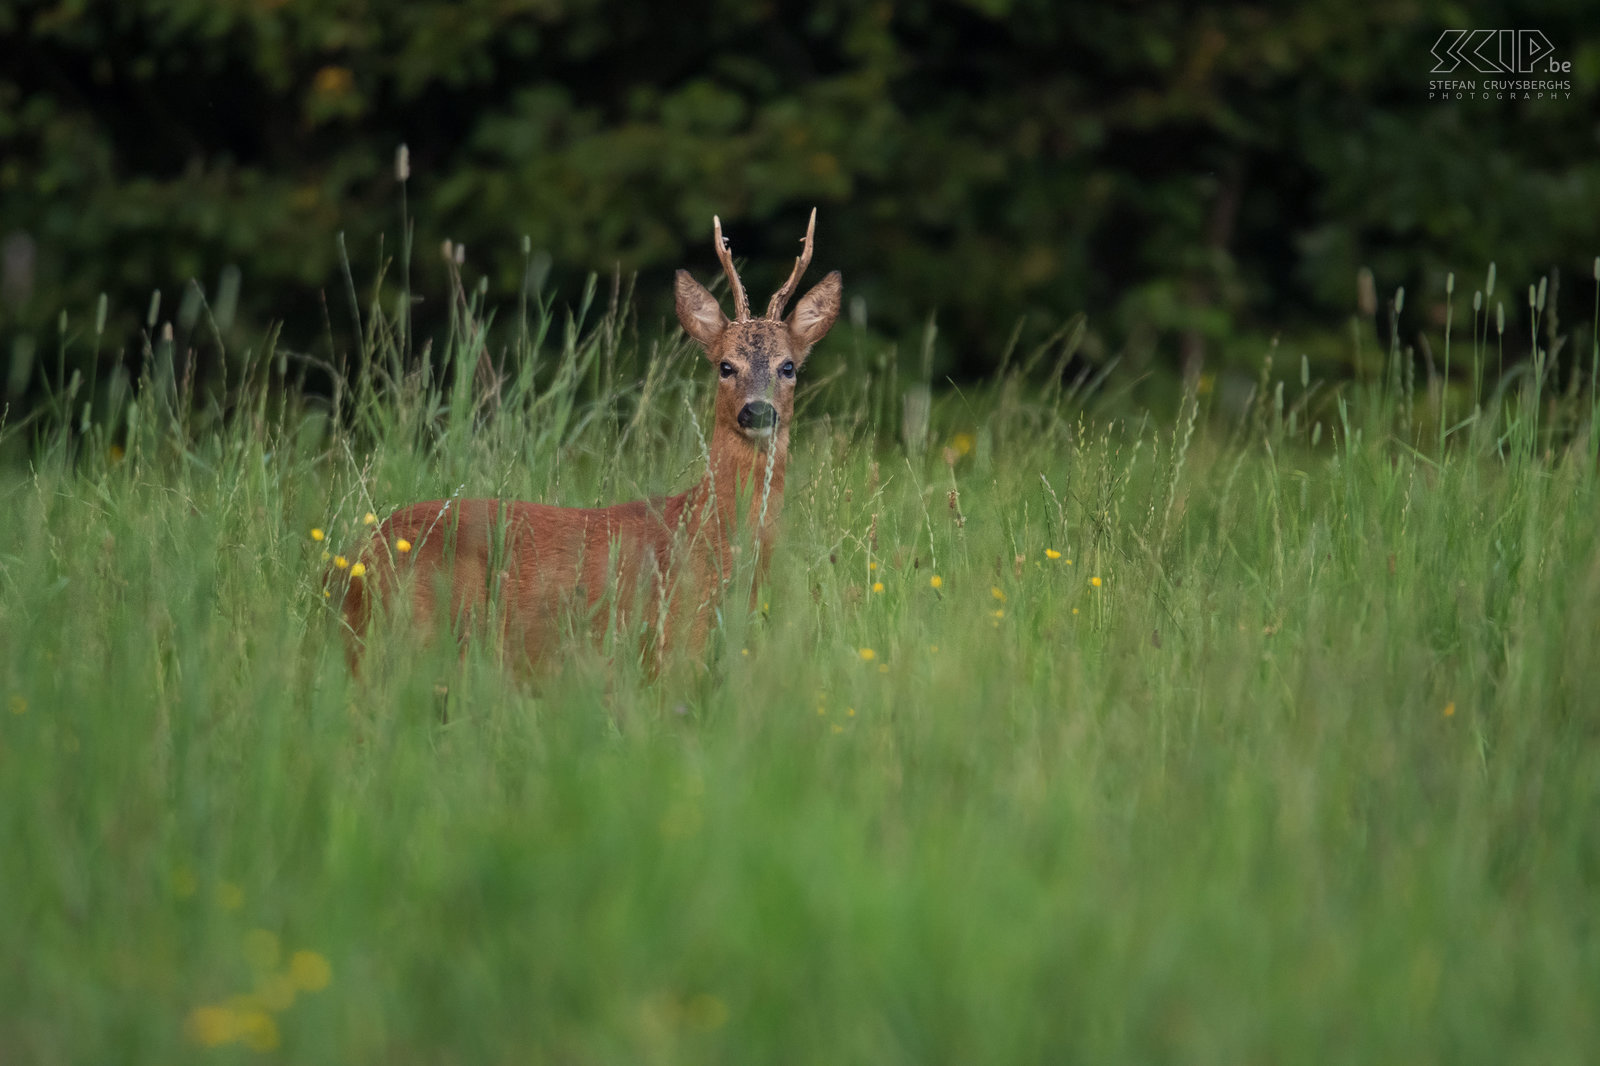 Roe deer buck A roe deer buck in a meadow on the border of the forest. Unlike other deer, roe deer do not have a tail, but the male animals have antlers almost the full year. An adult roe deer is between 100 and 140cm tall and weighs between 20 and 35kg. Stefan Cruysberghs